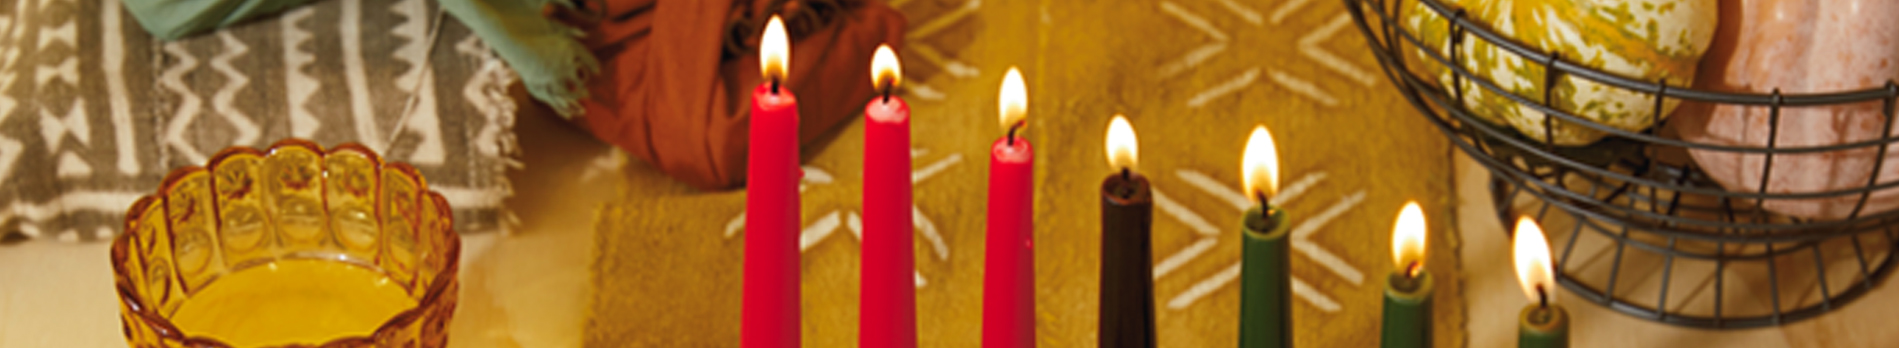 A Kwanzaa Kinara filled with lit candles on a table full of winter squash and celebratory food.